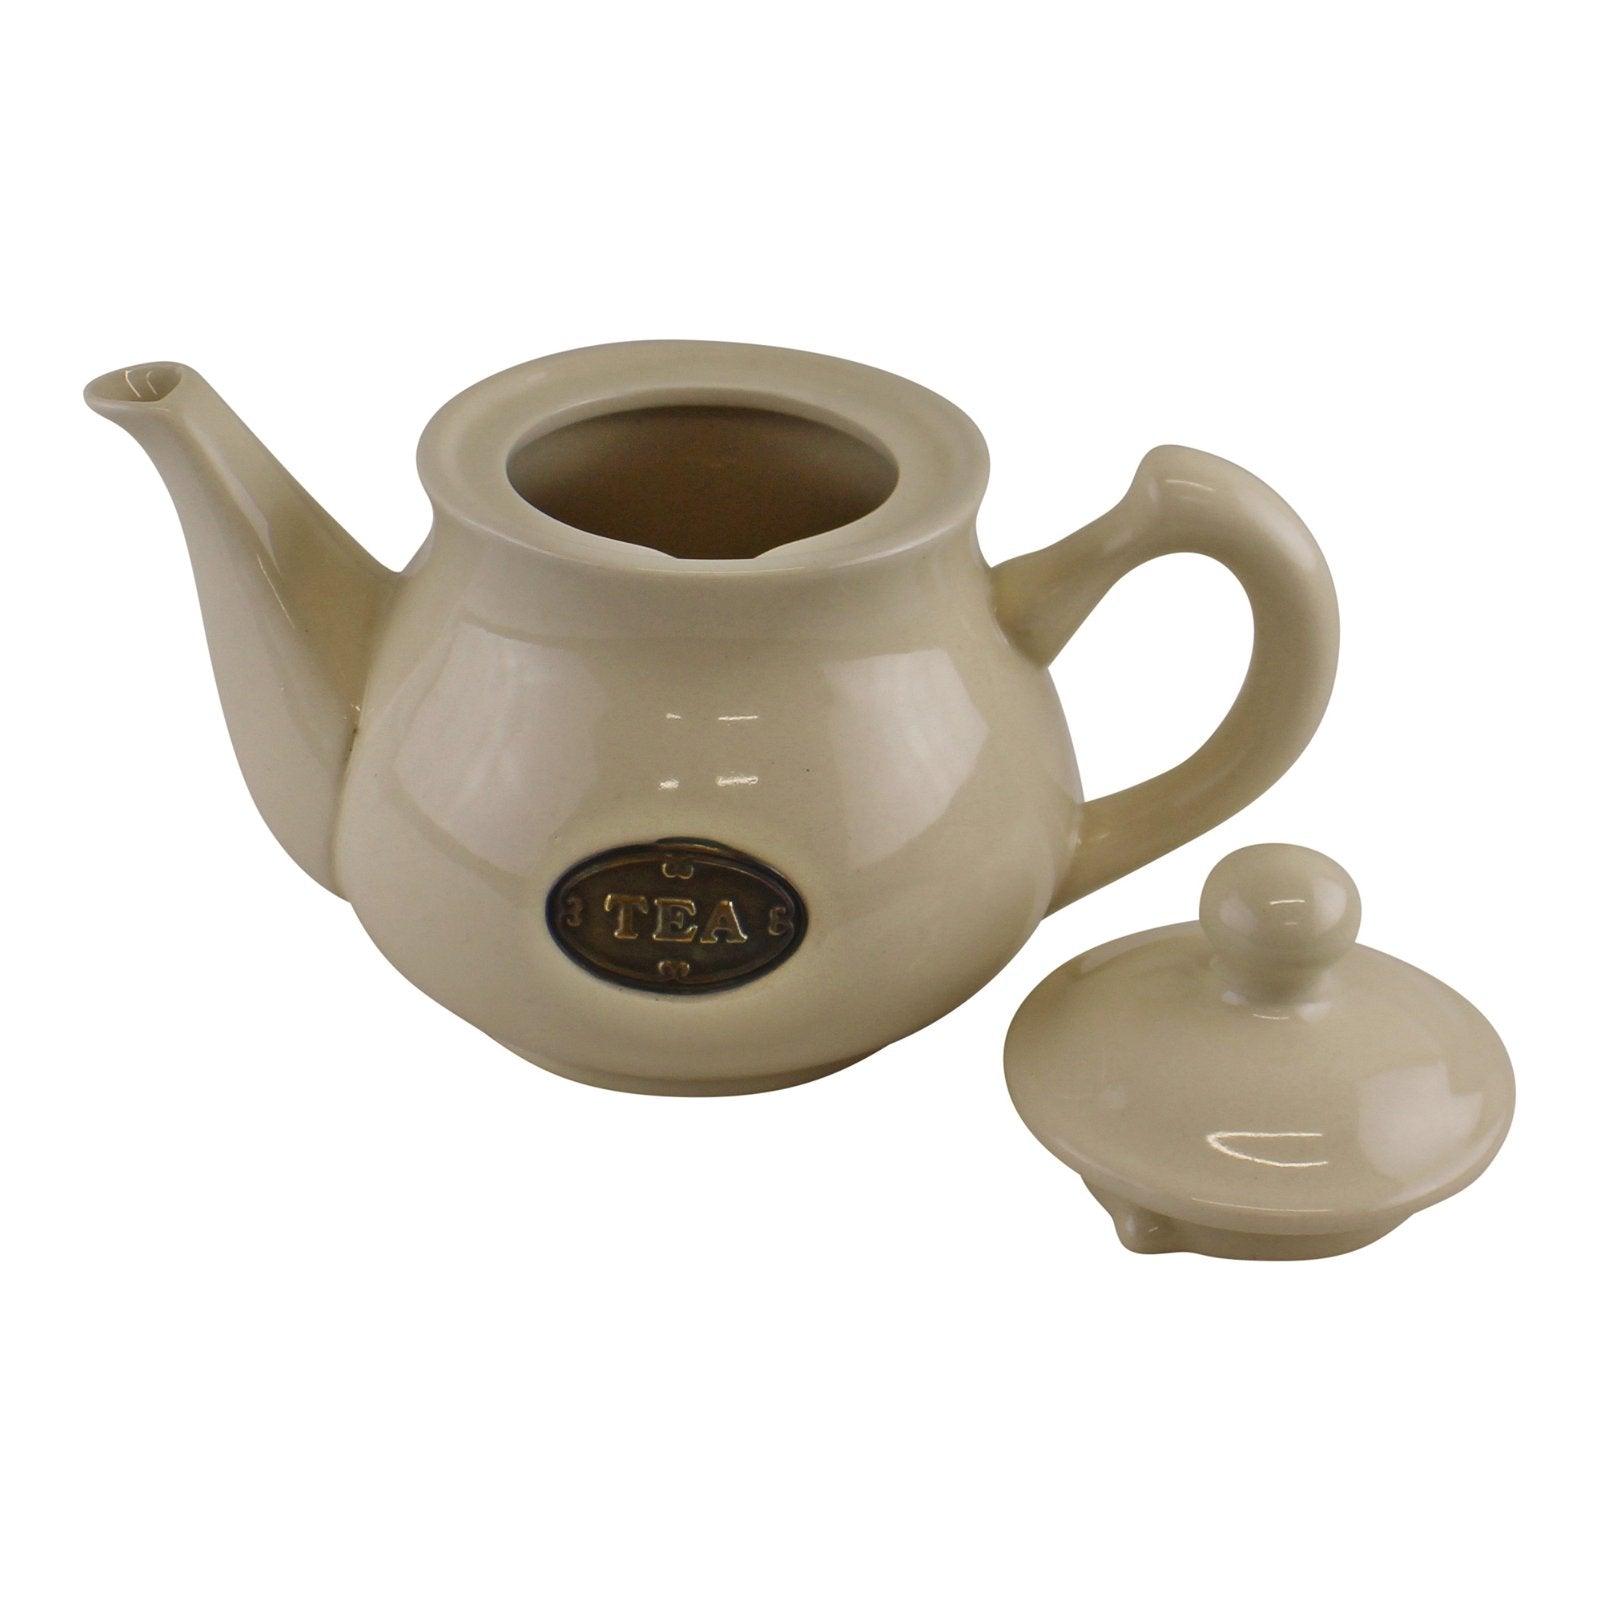 View Country Cottage Cream Ceramic Teapot information